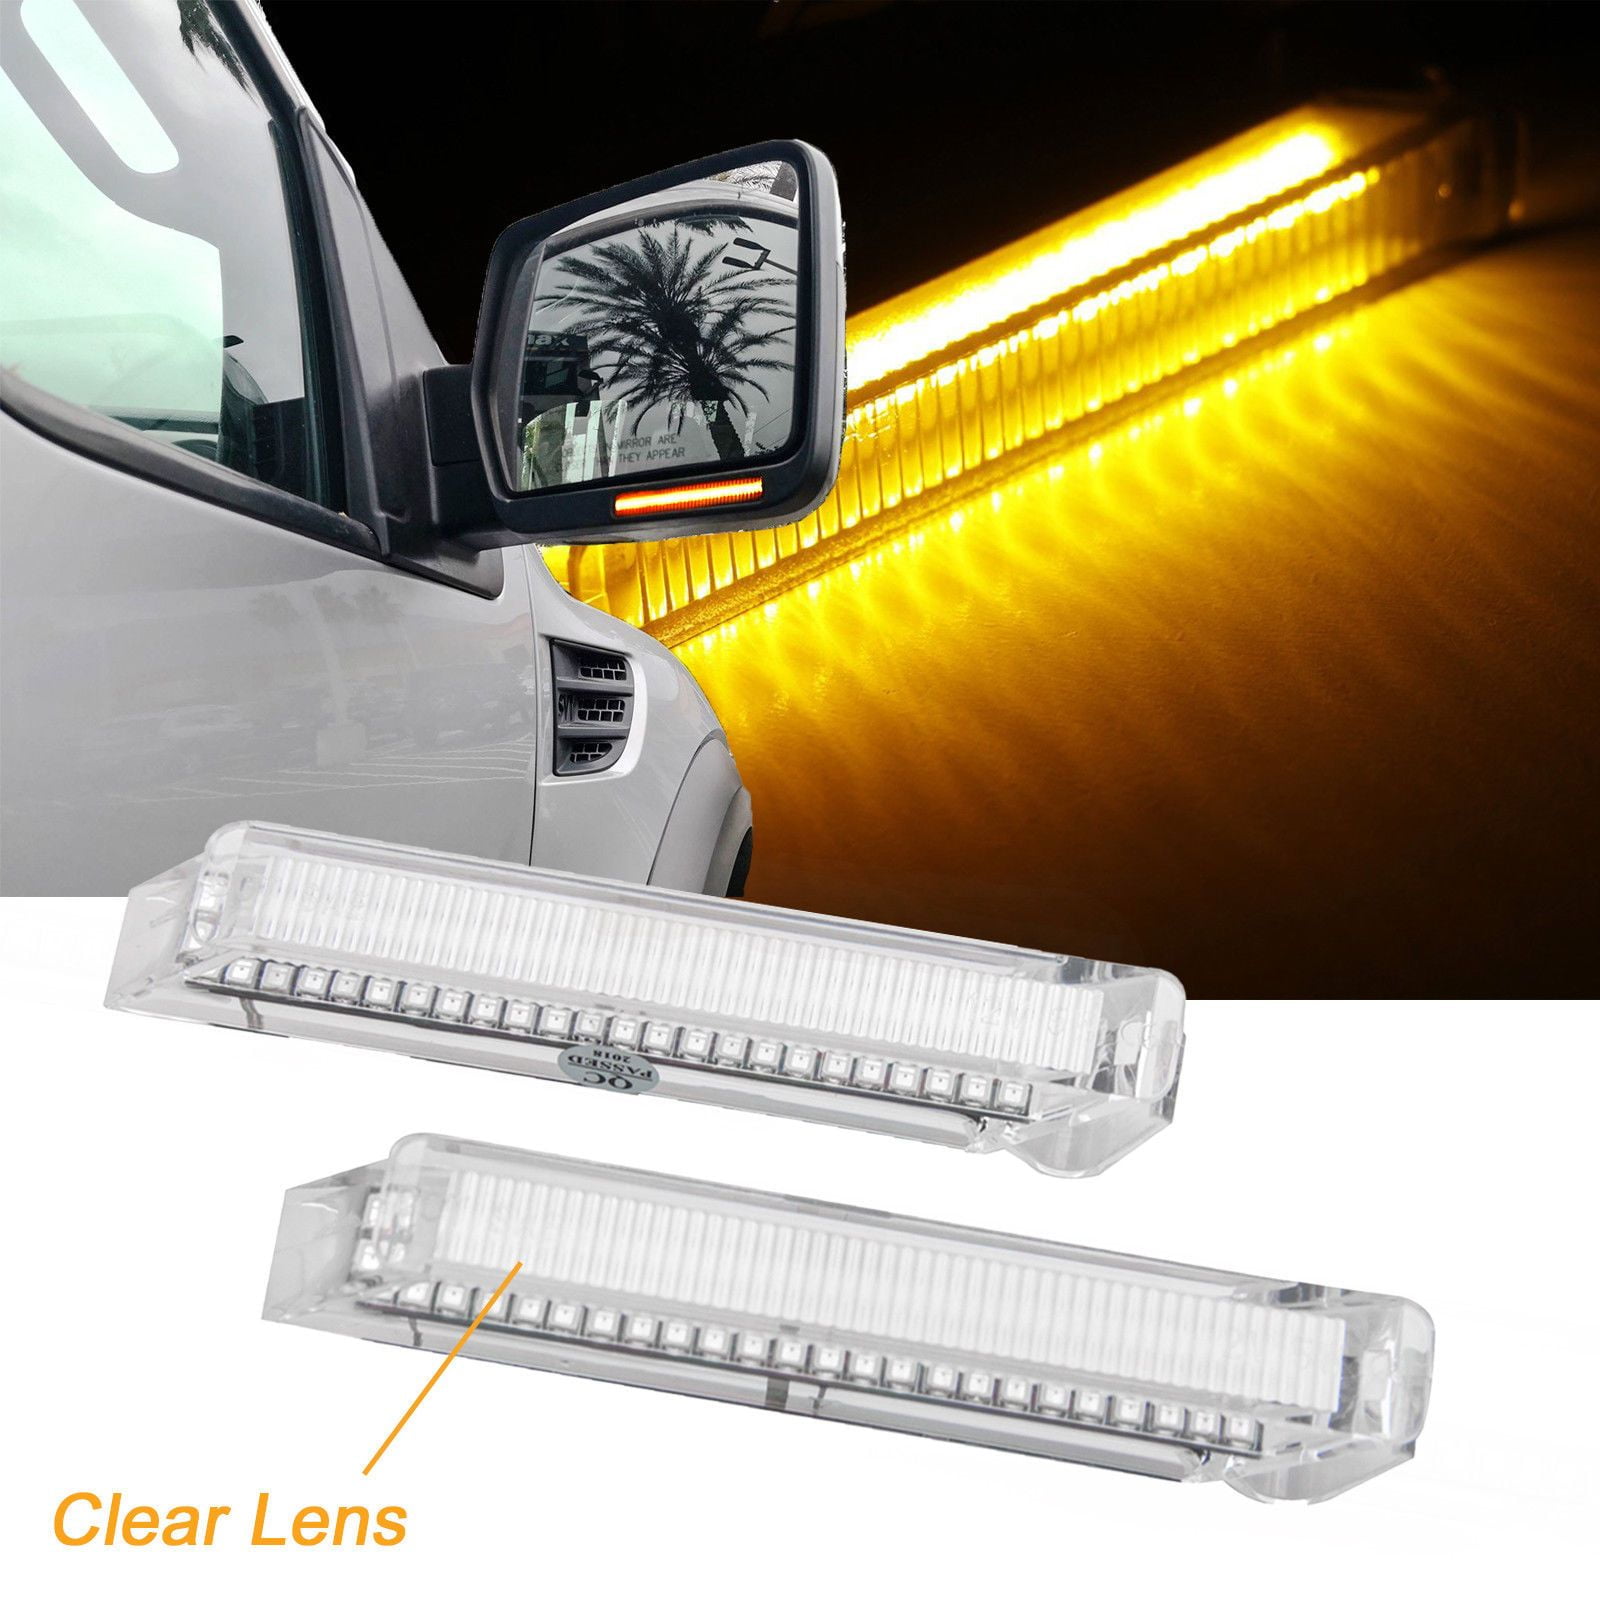 Xotic Tech 2x Clear Lens LED Side View Mirror Light Turn Signal Lamp for Ford F-150 2004-2014 2014 Ford F150 Mirror Turn Signal Replacement